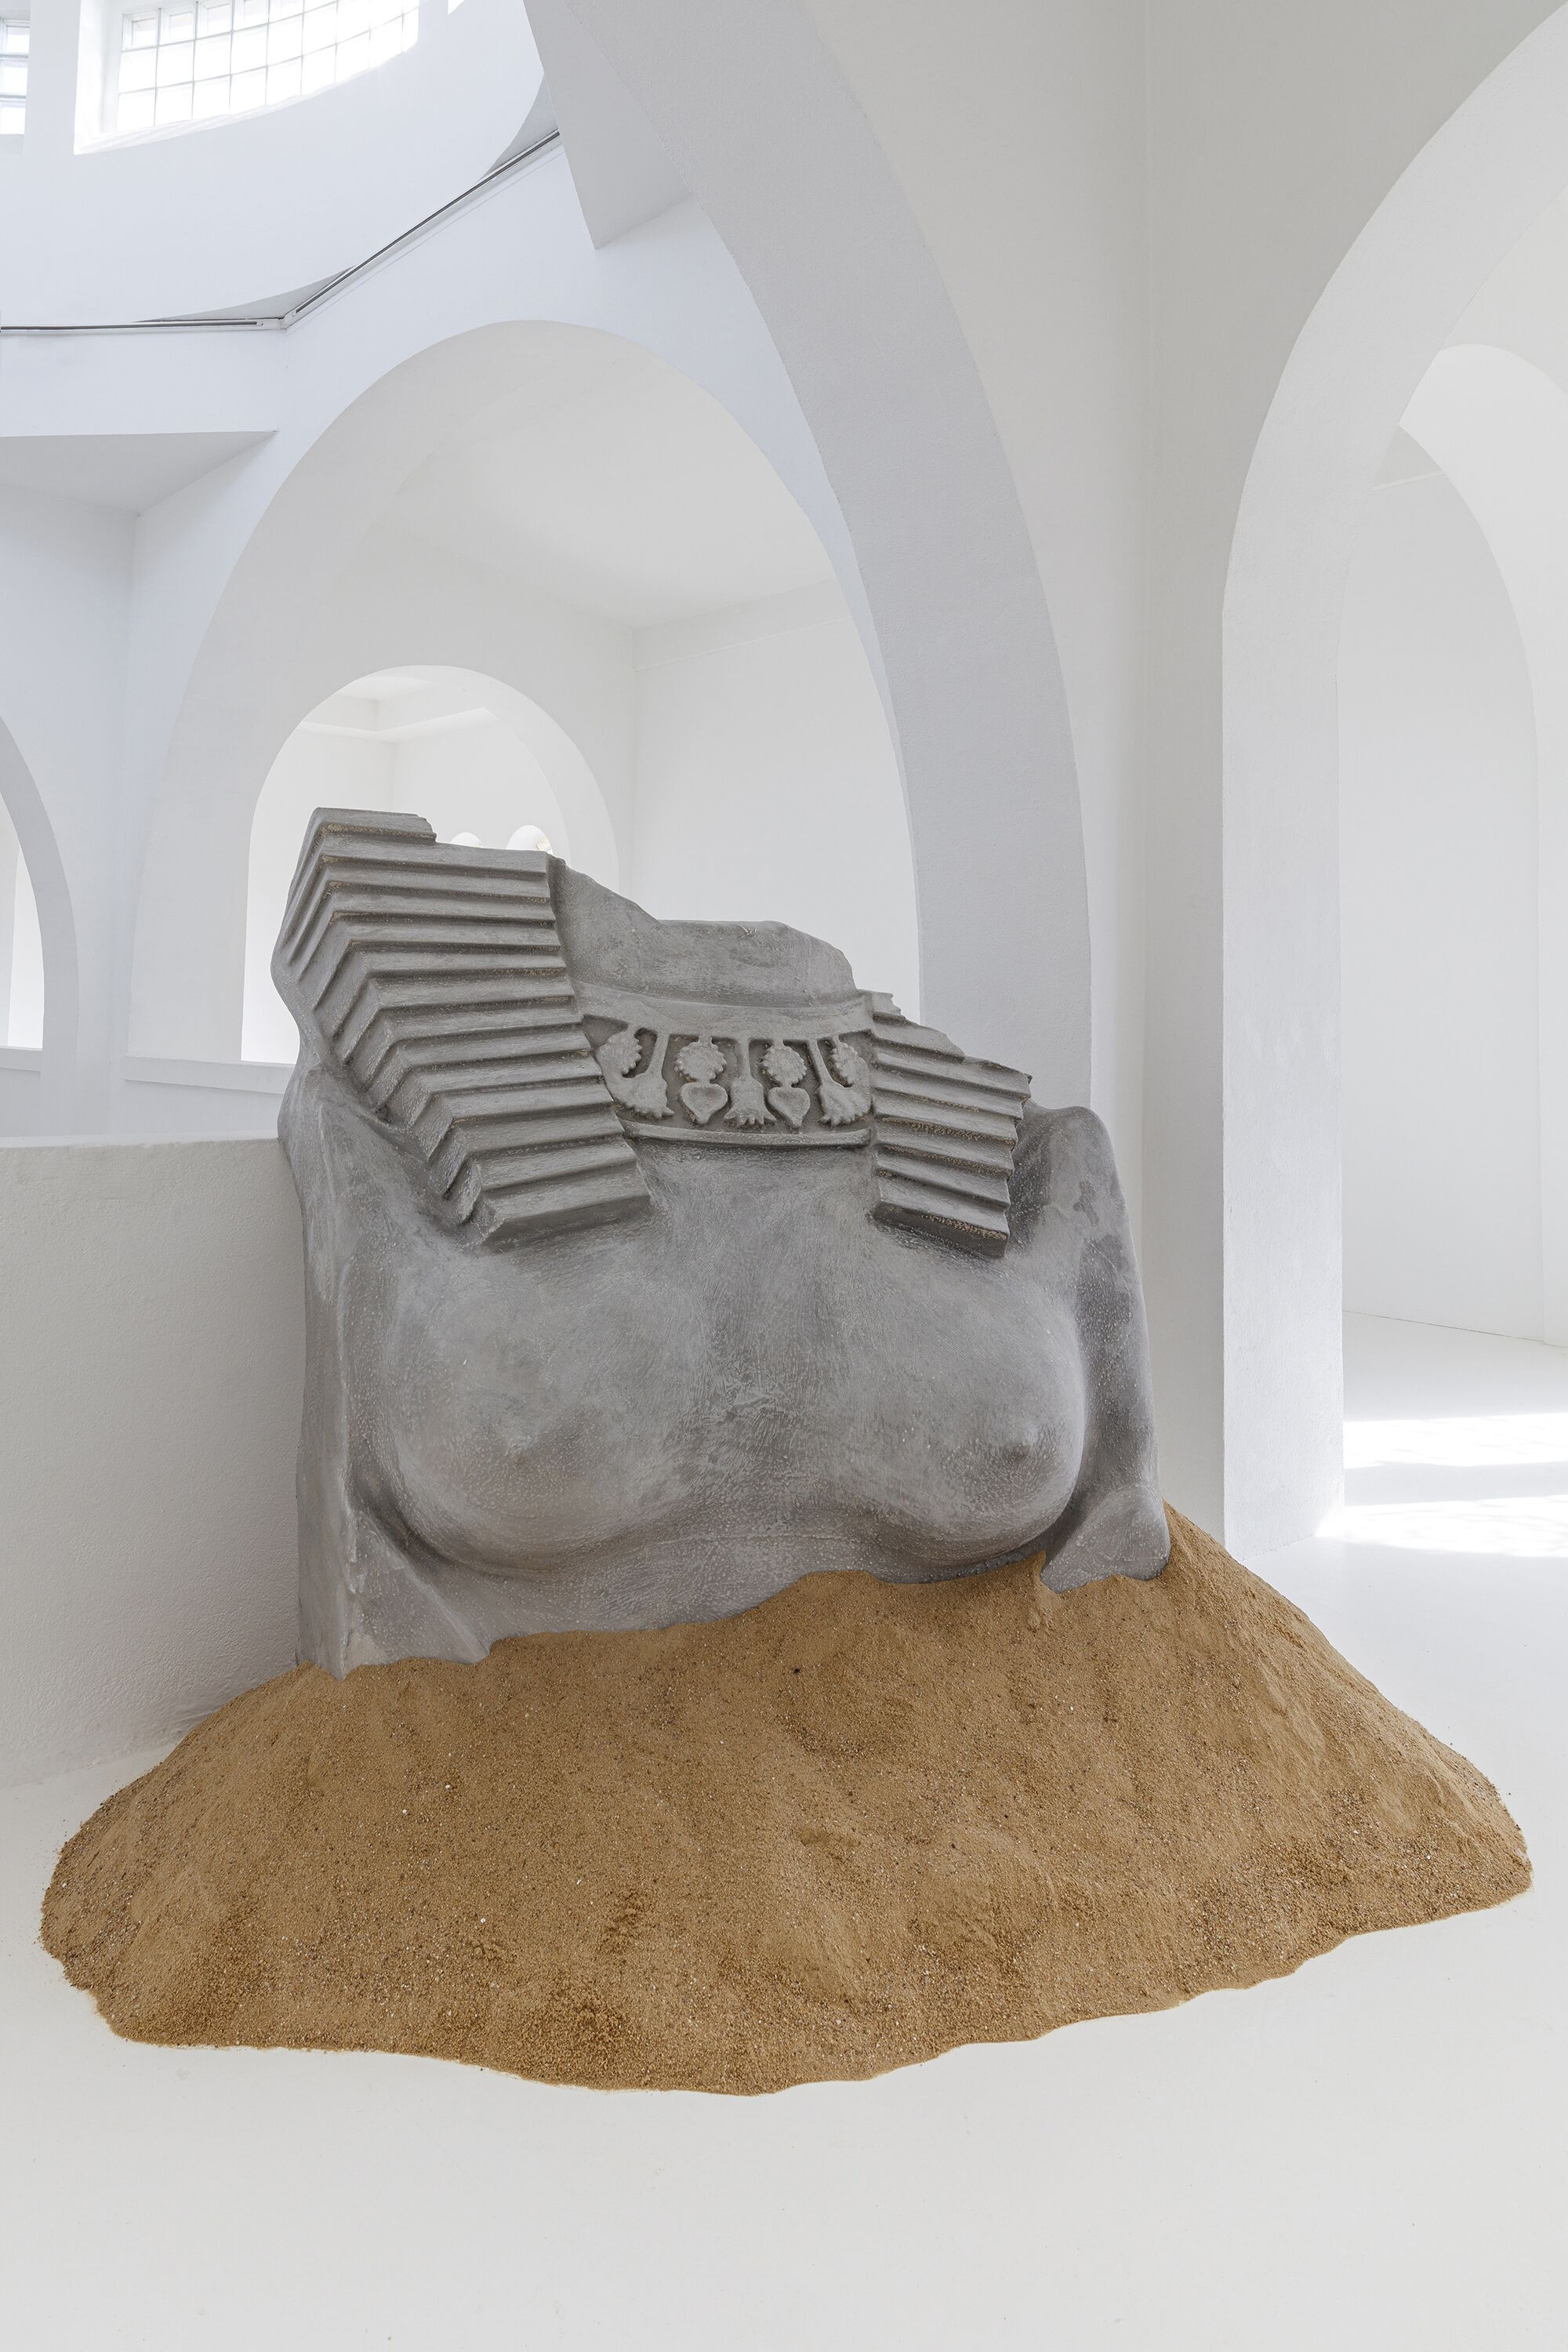 Zuzanna Czebatul, Their New Power (Chest), 2020. Polystyrene, acrylic and sand, 150×50 x 150 cm. From the exhibition &#39;The Singing Dunes’, CAC-La synagogue de Delme